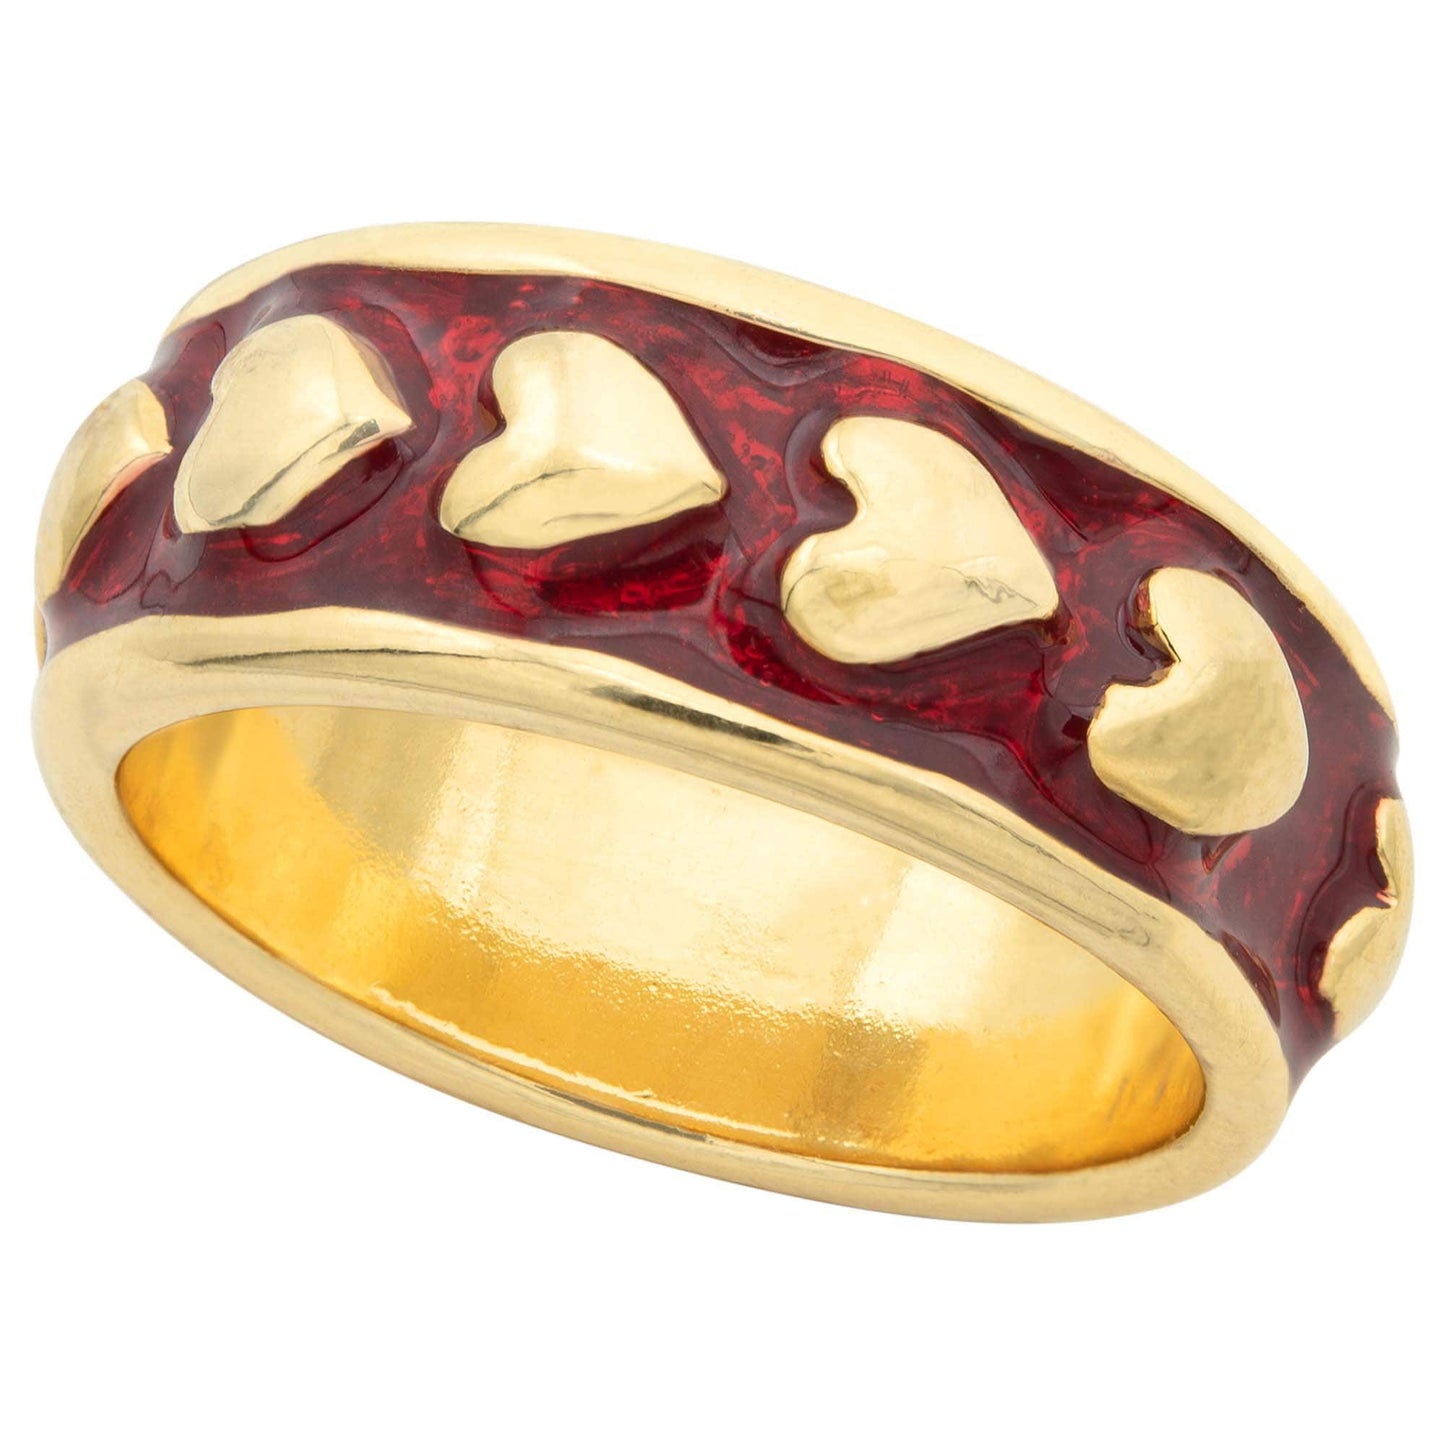 Vintage Ring 1980's Heart Band Ring 18k Gold  R3717 - Limited Stock - Never Worn